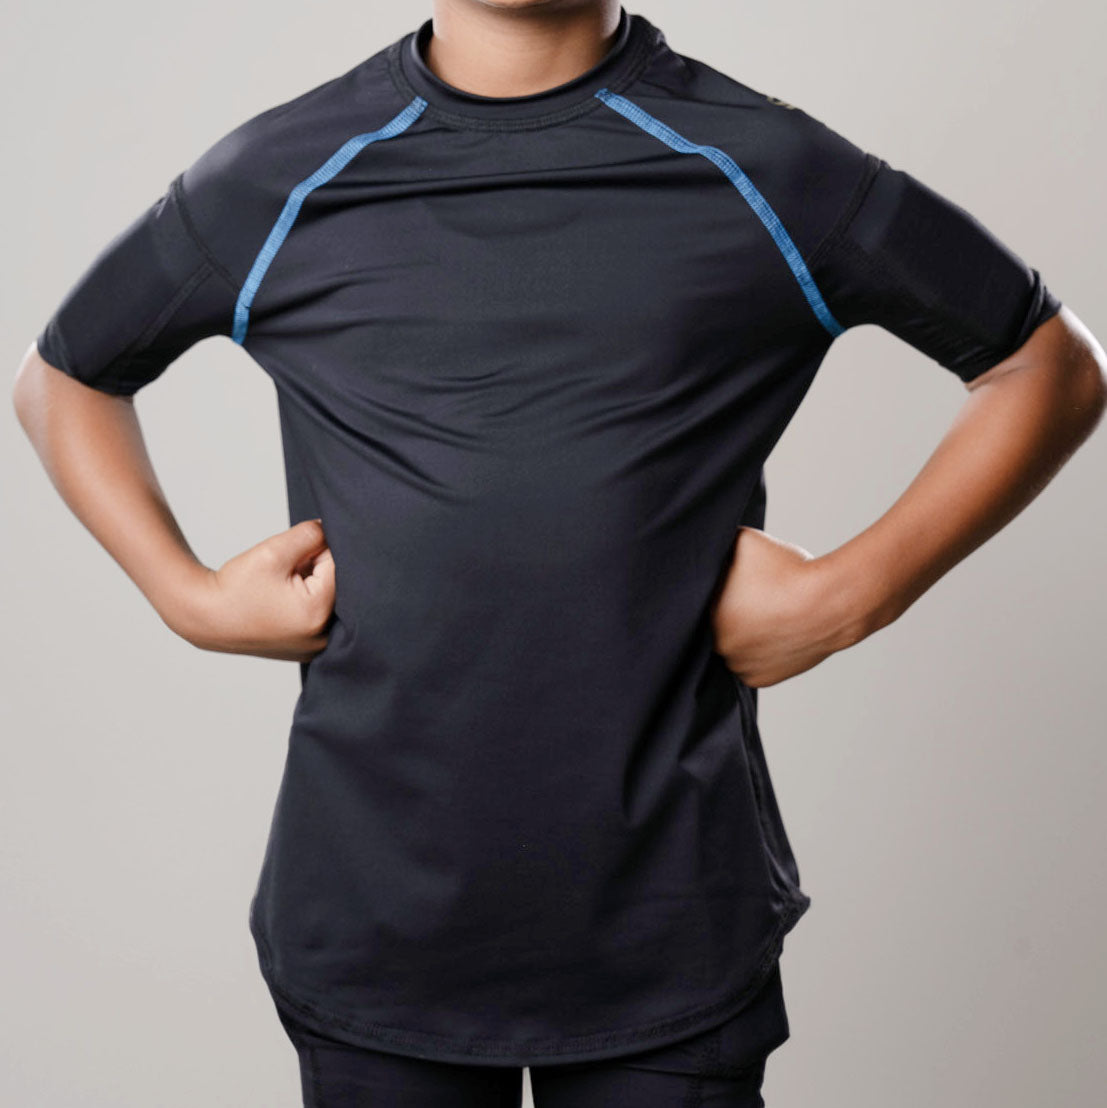 Black short sleeve training top for boys with integrated bicep weights, designed for muscle engagement and strength enhancement.